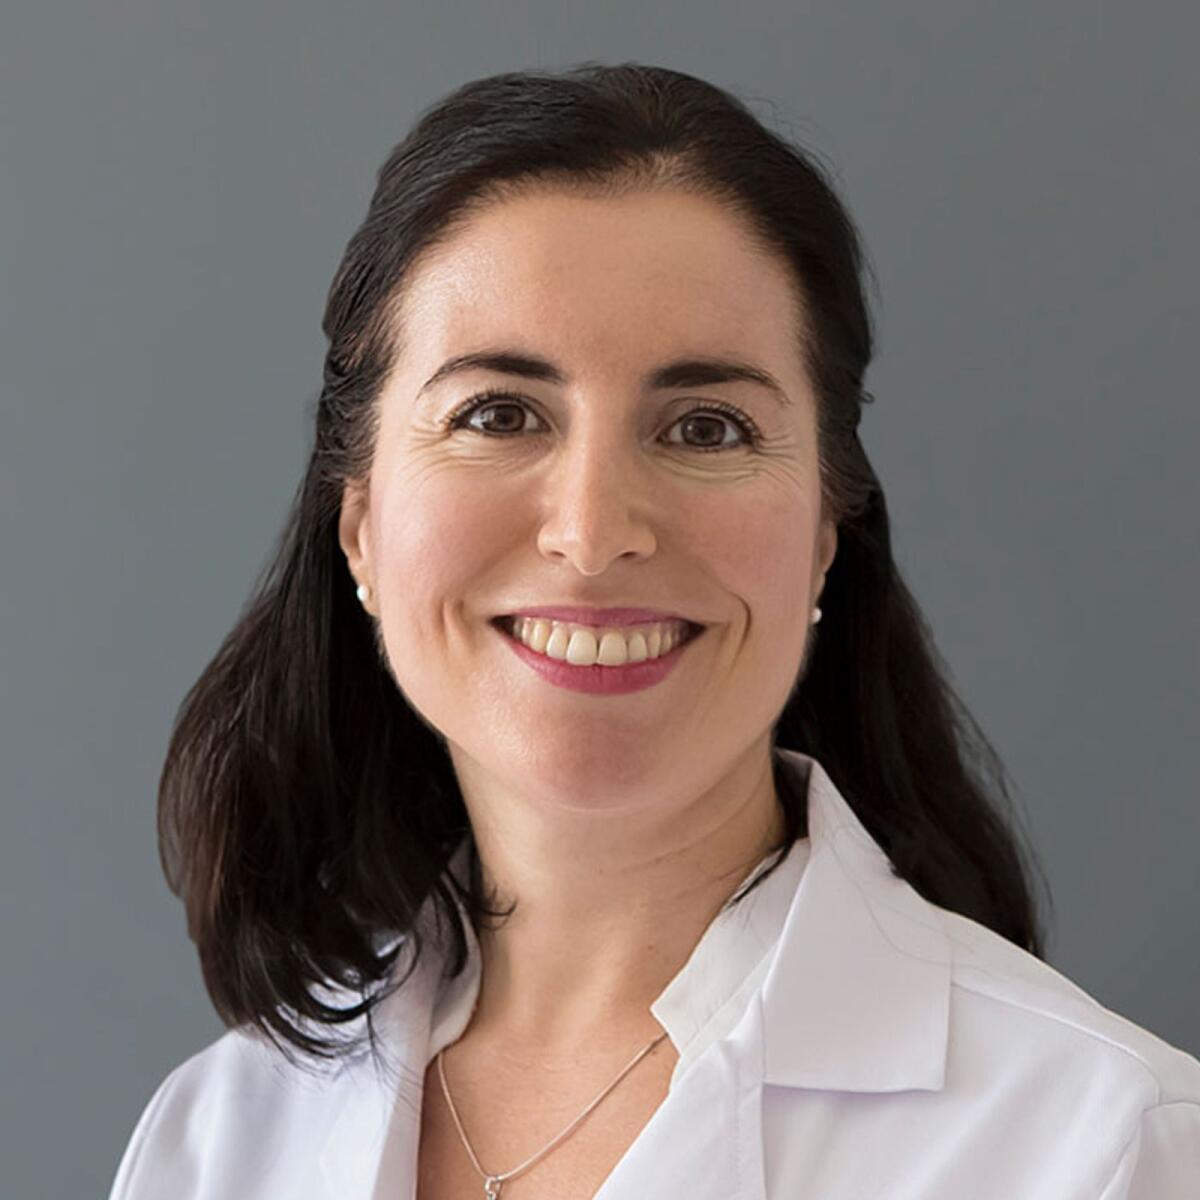 Dr Ania Buigues Llull